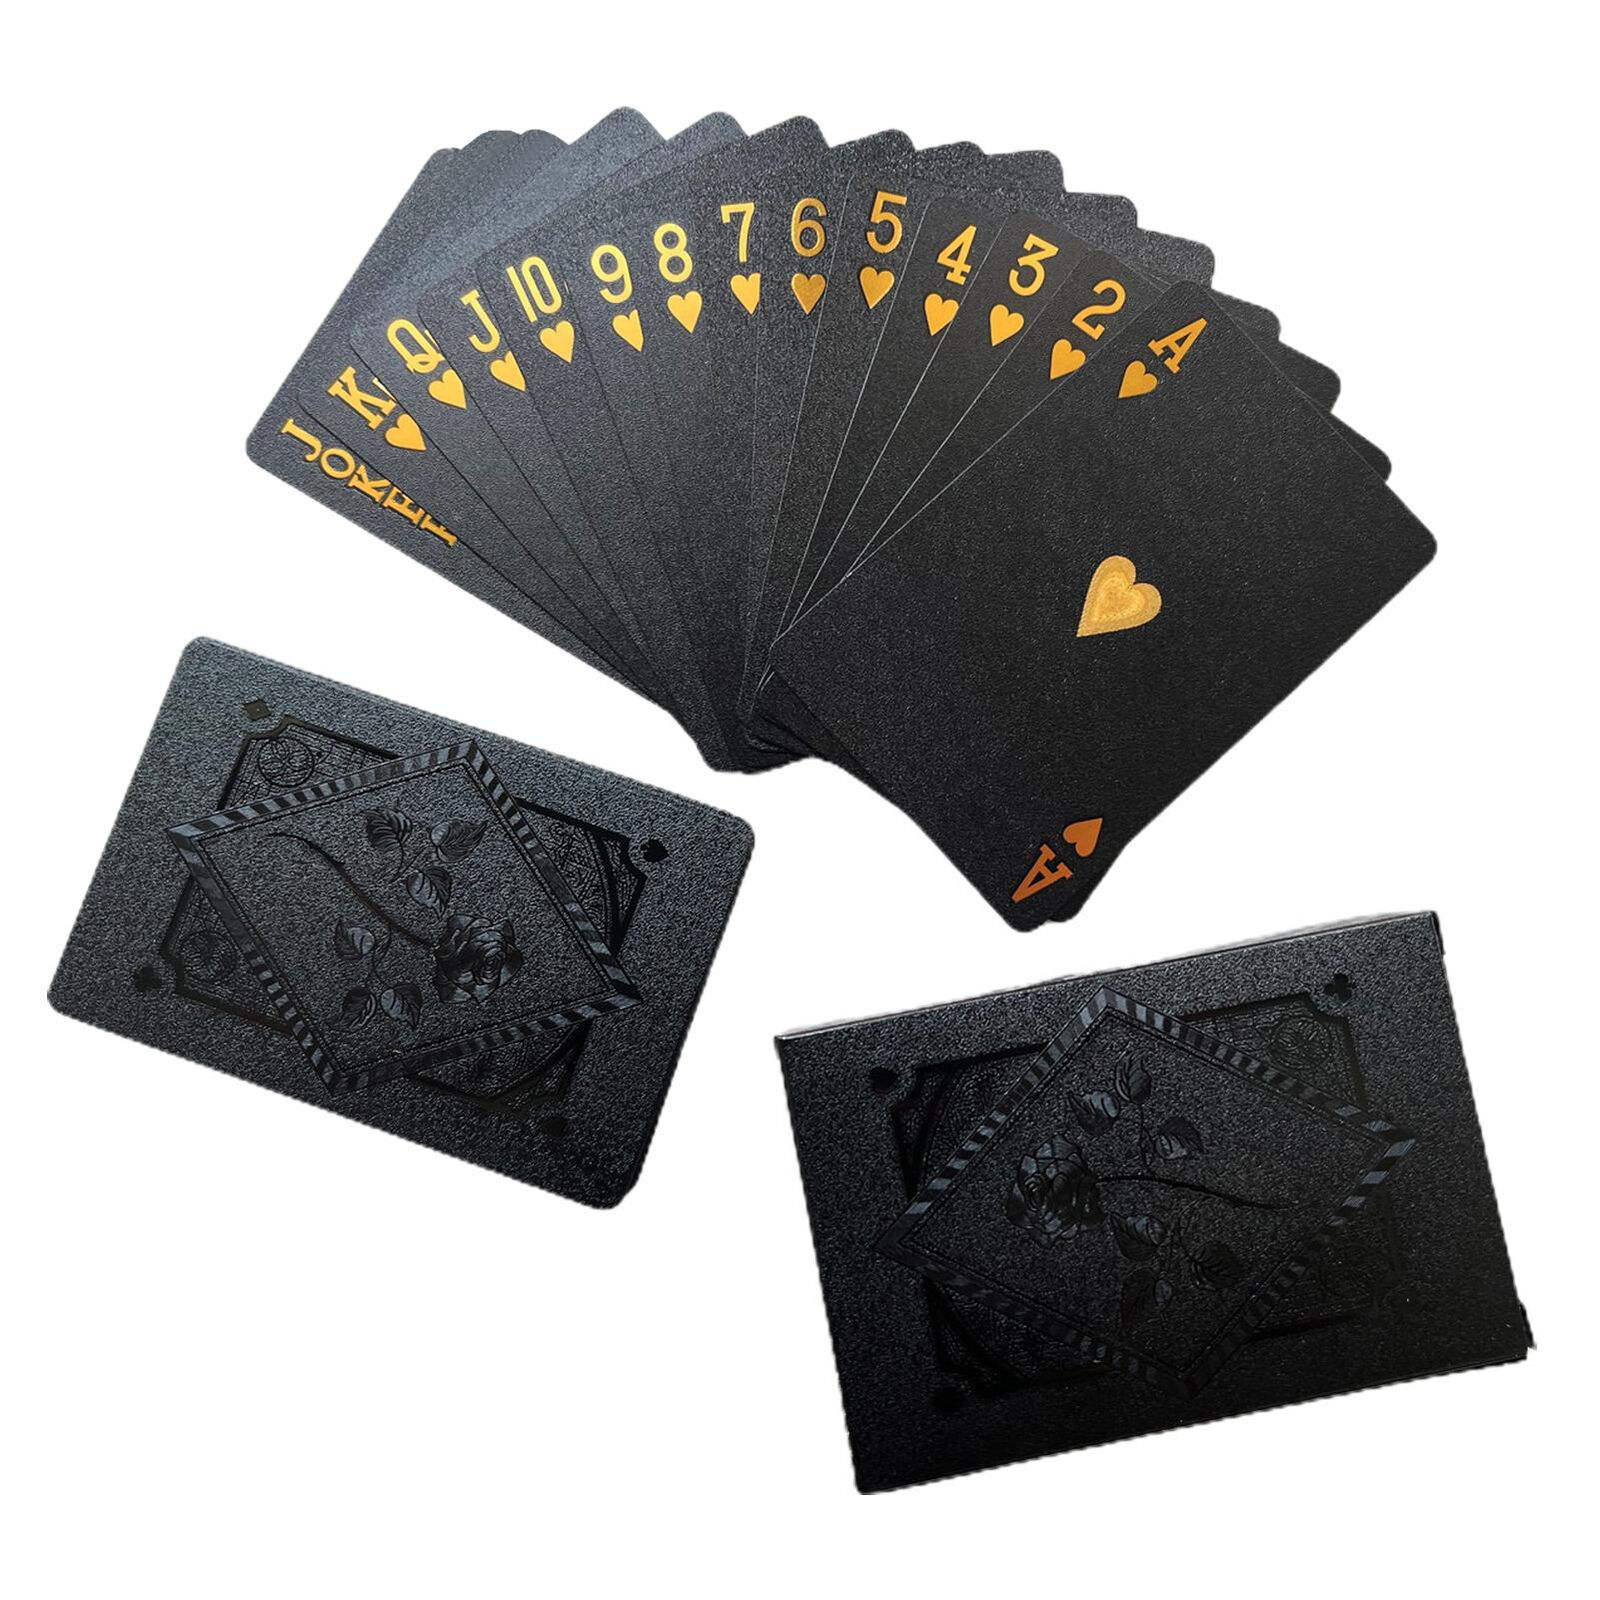 Set of 54 Exquisite Black Poker Foil Playing Cards